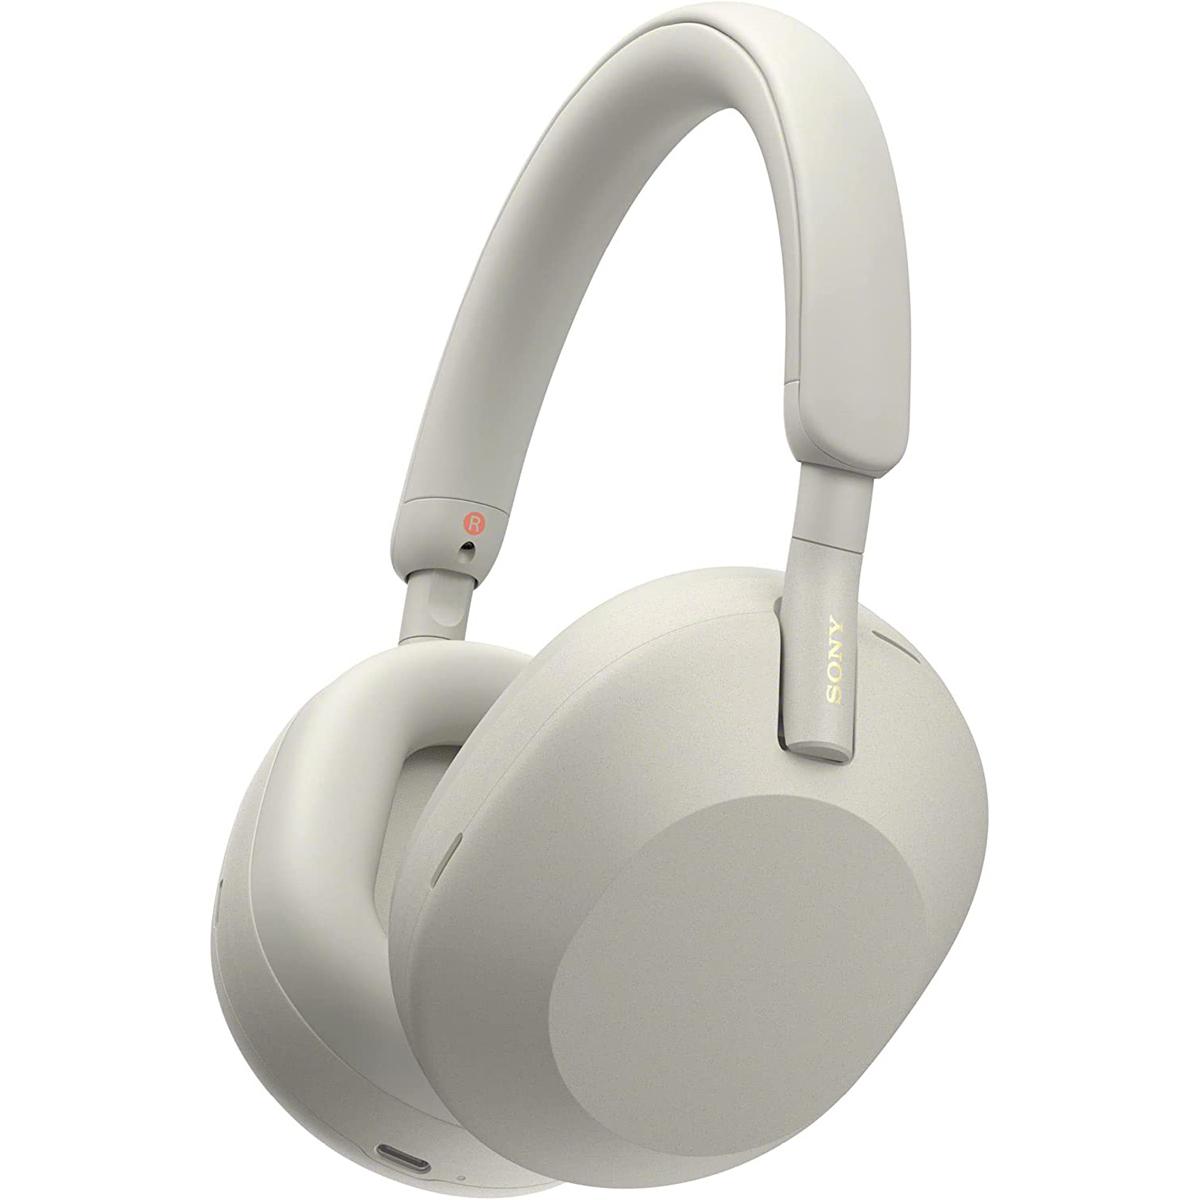 Sony WH-1000XM5 Wireless Noise-Cancelling Bluetooth Headphones for $279 Shipped